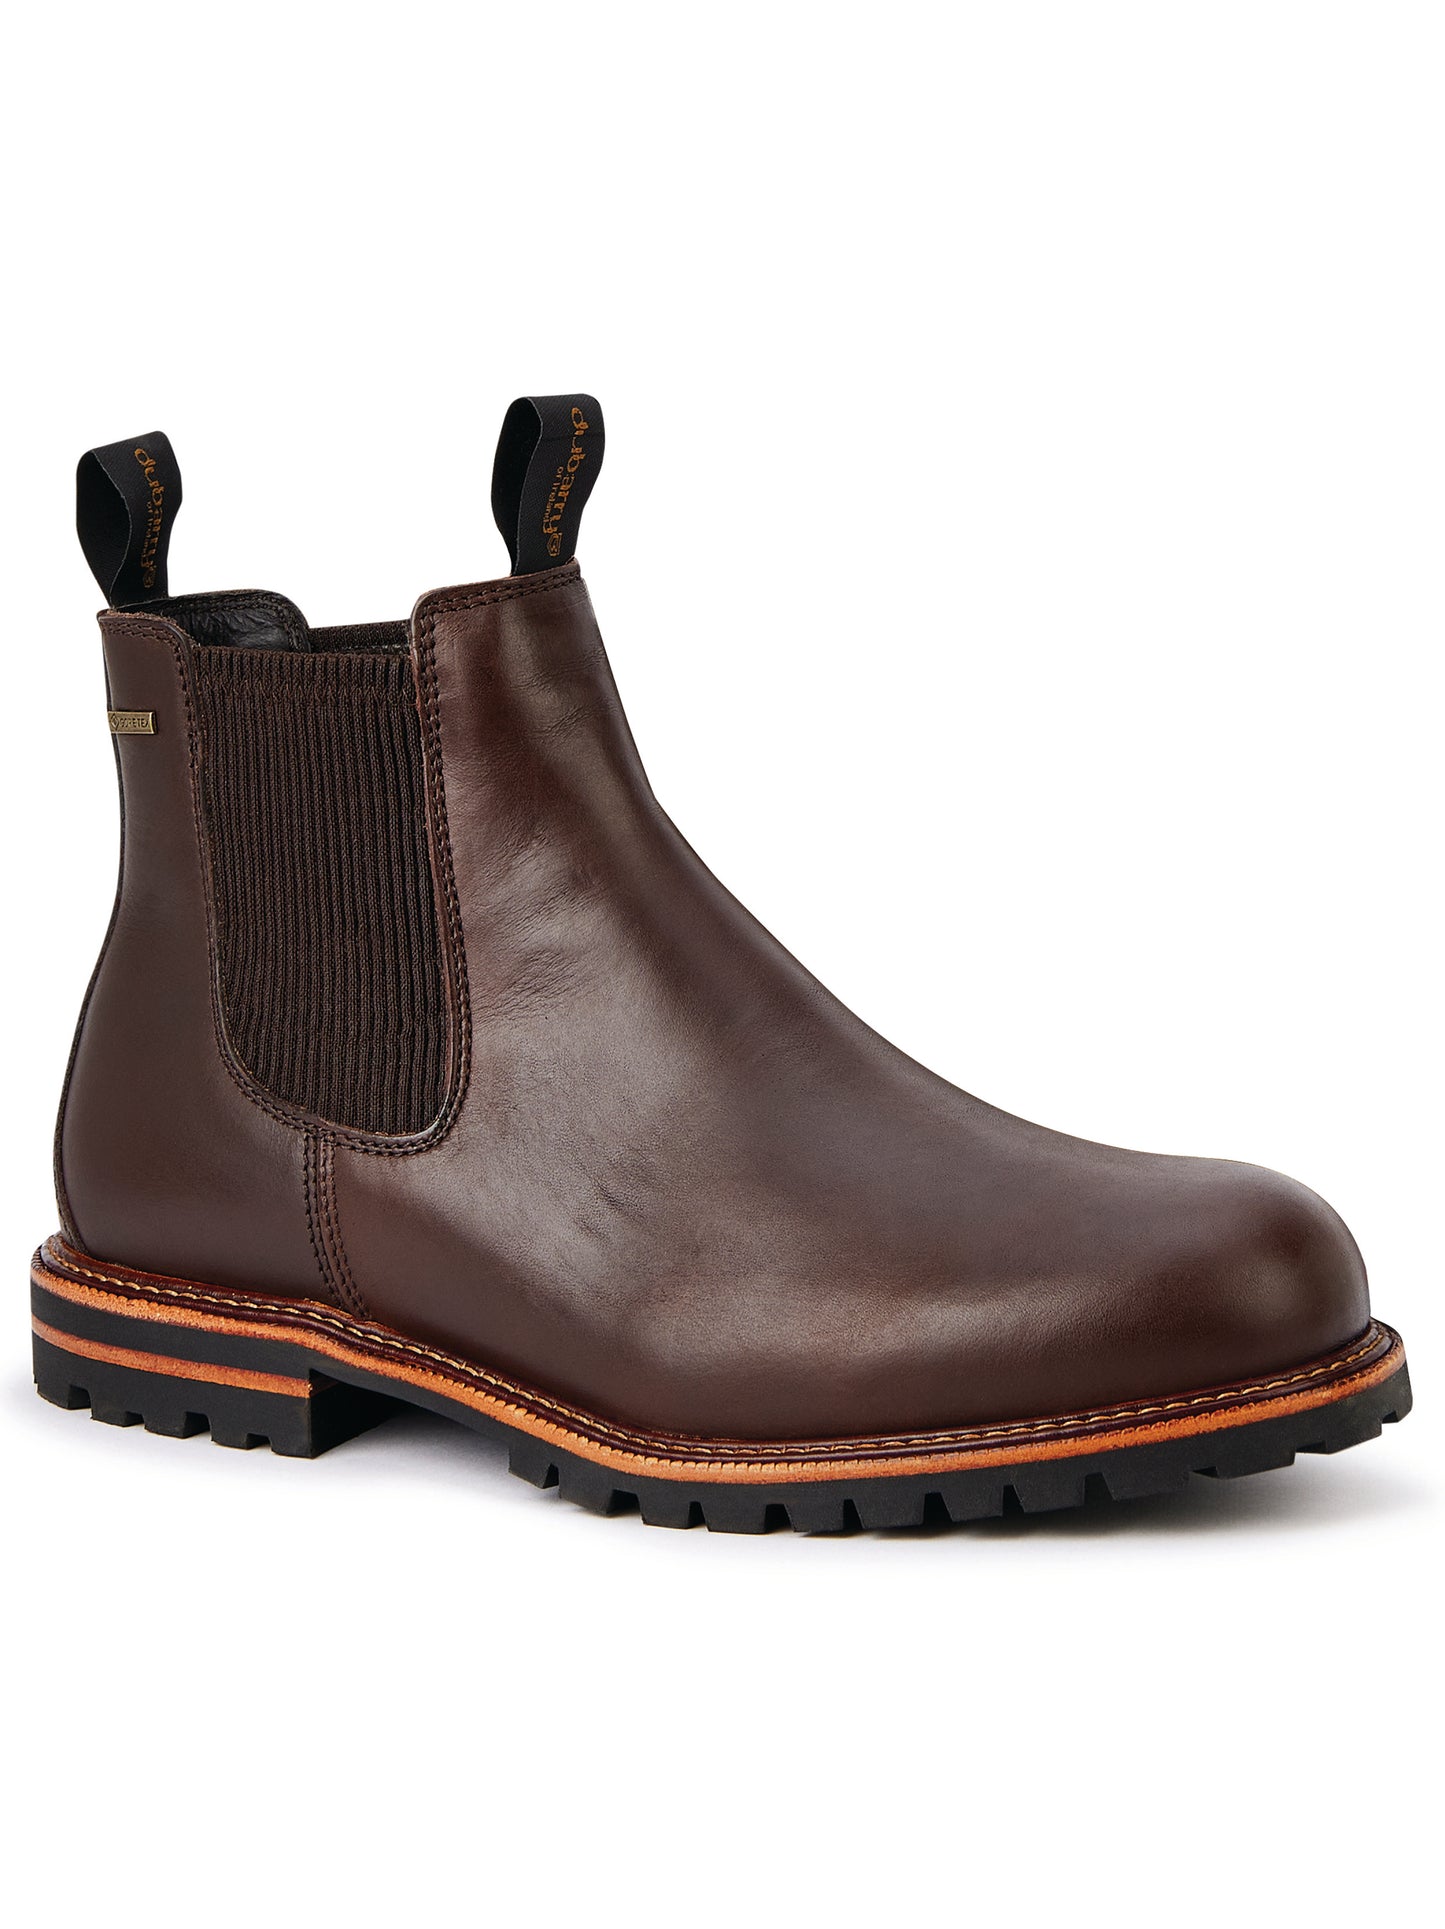 Offaly Ankle Boot Mahogany